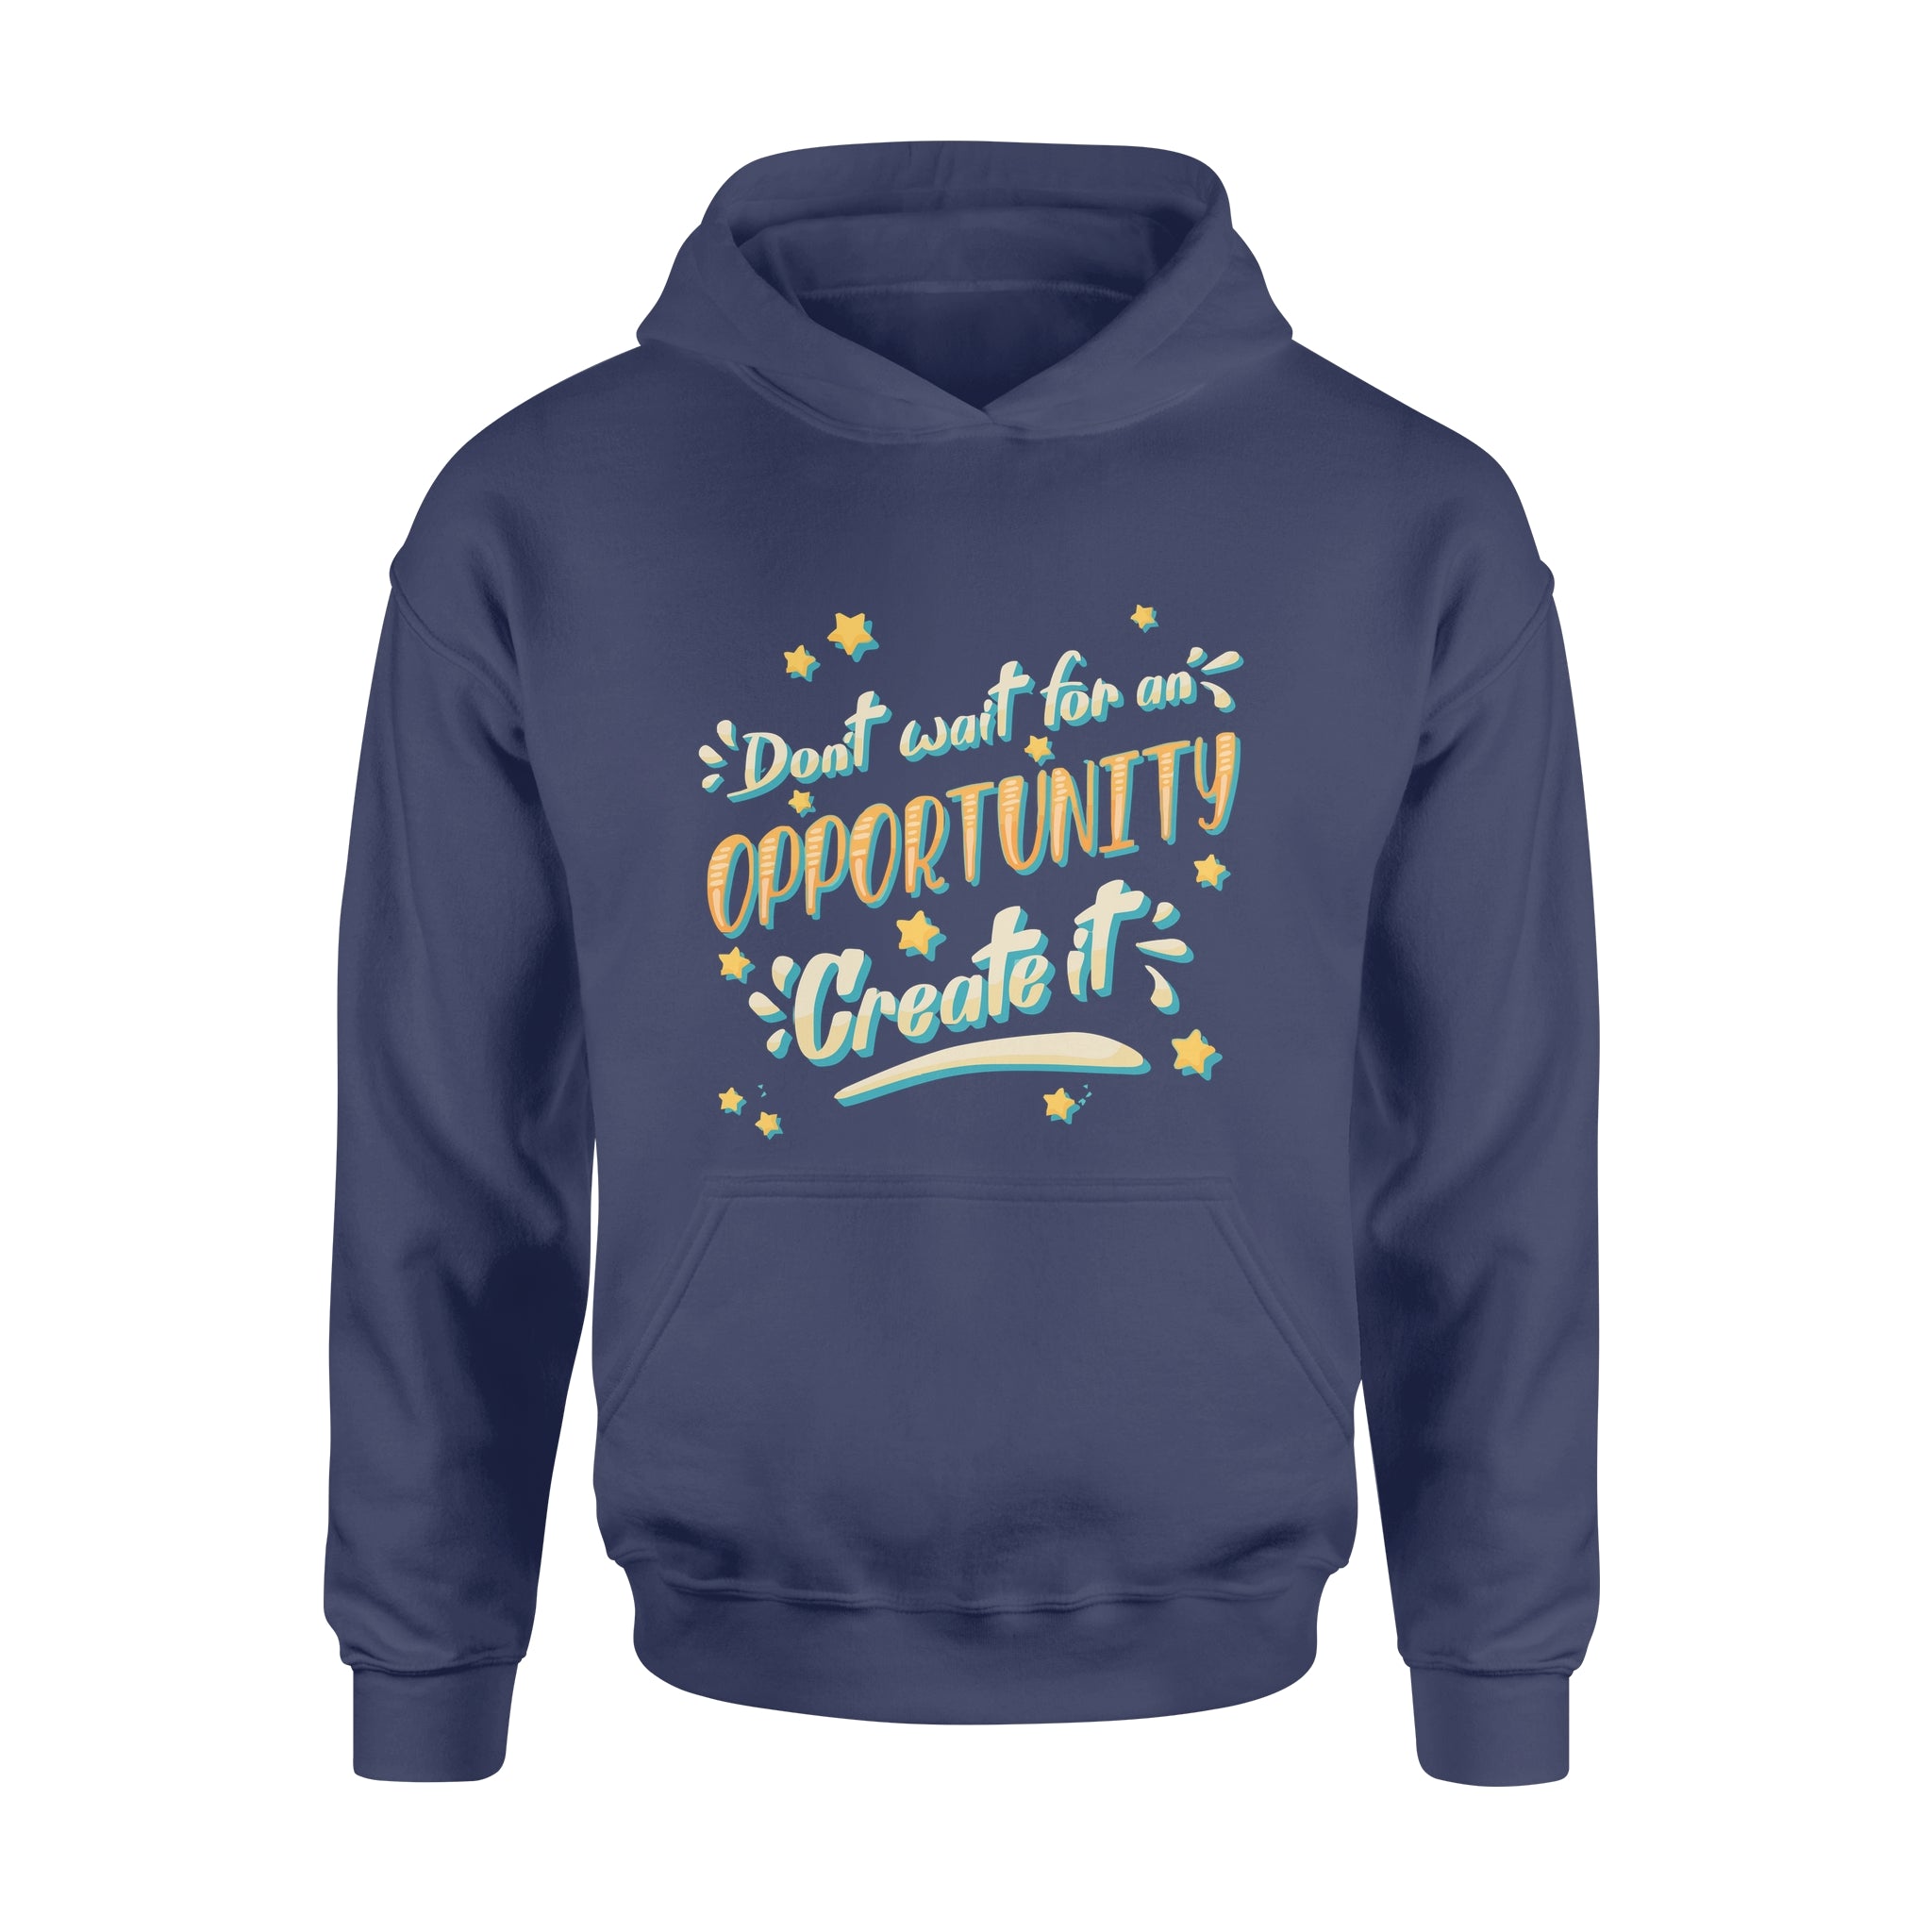 Don't Wait For An Oppoptunity Create It - Hoodie